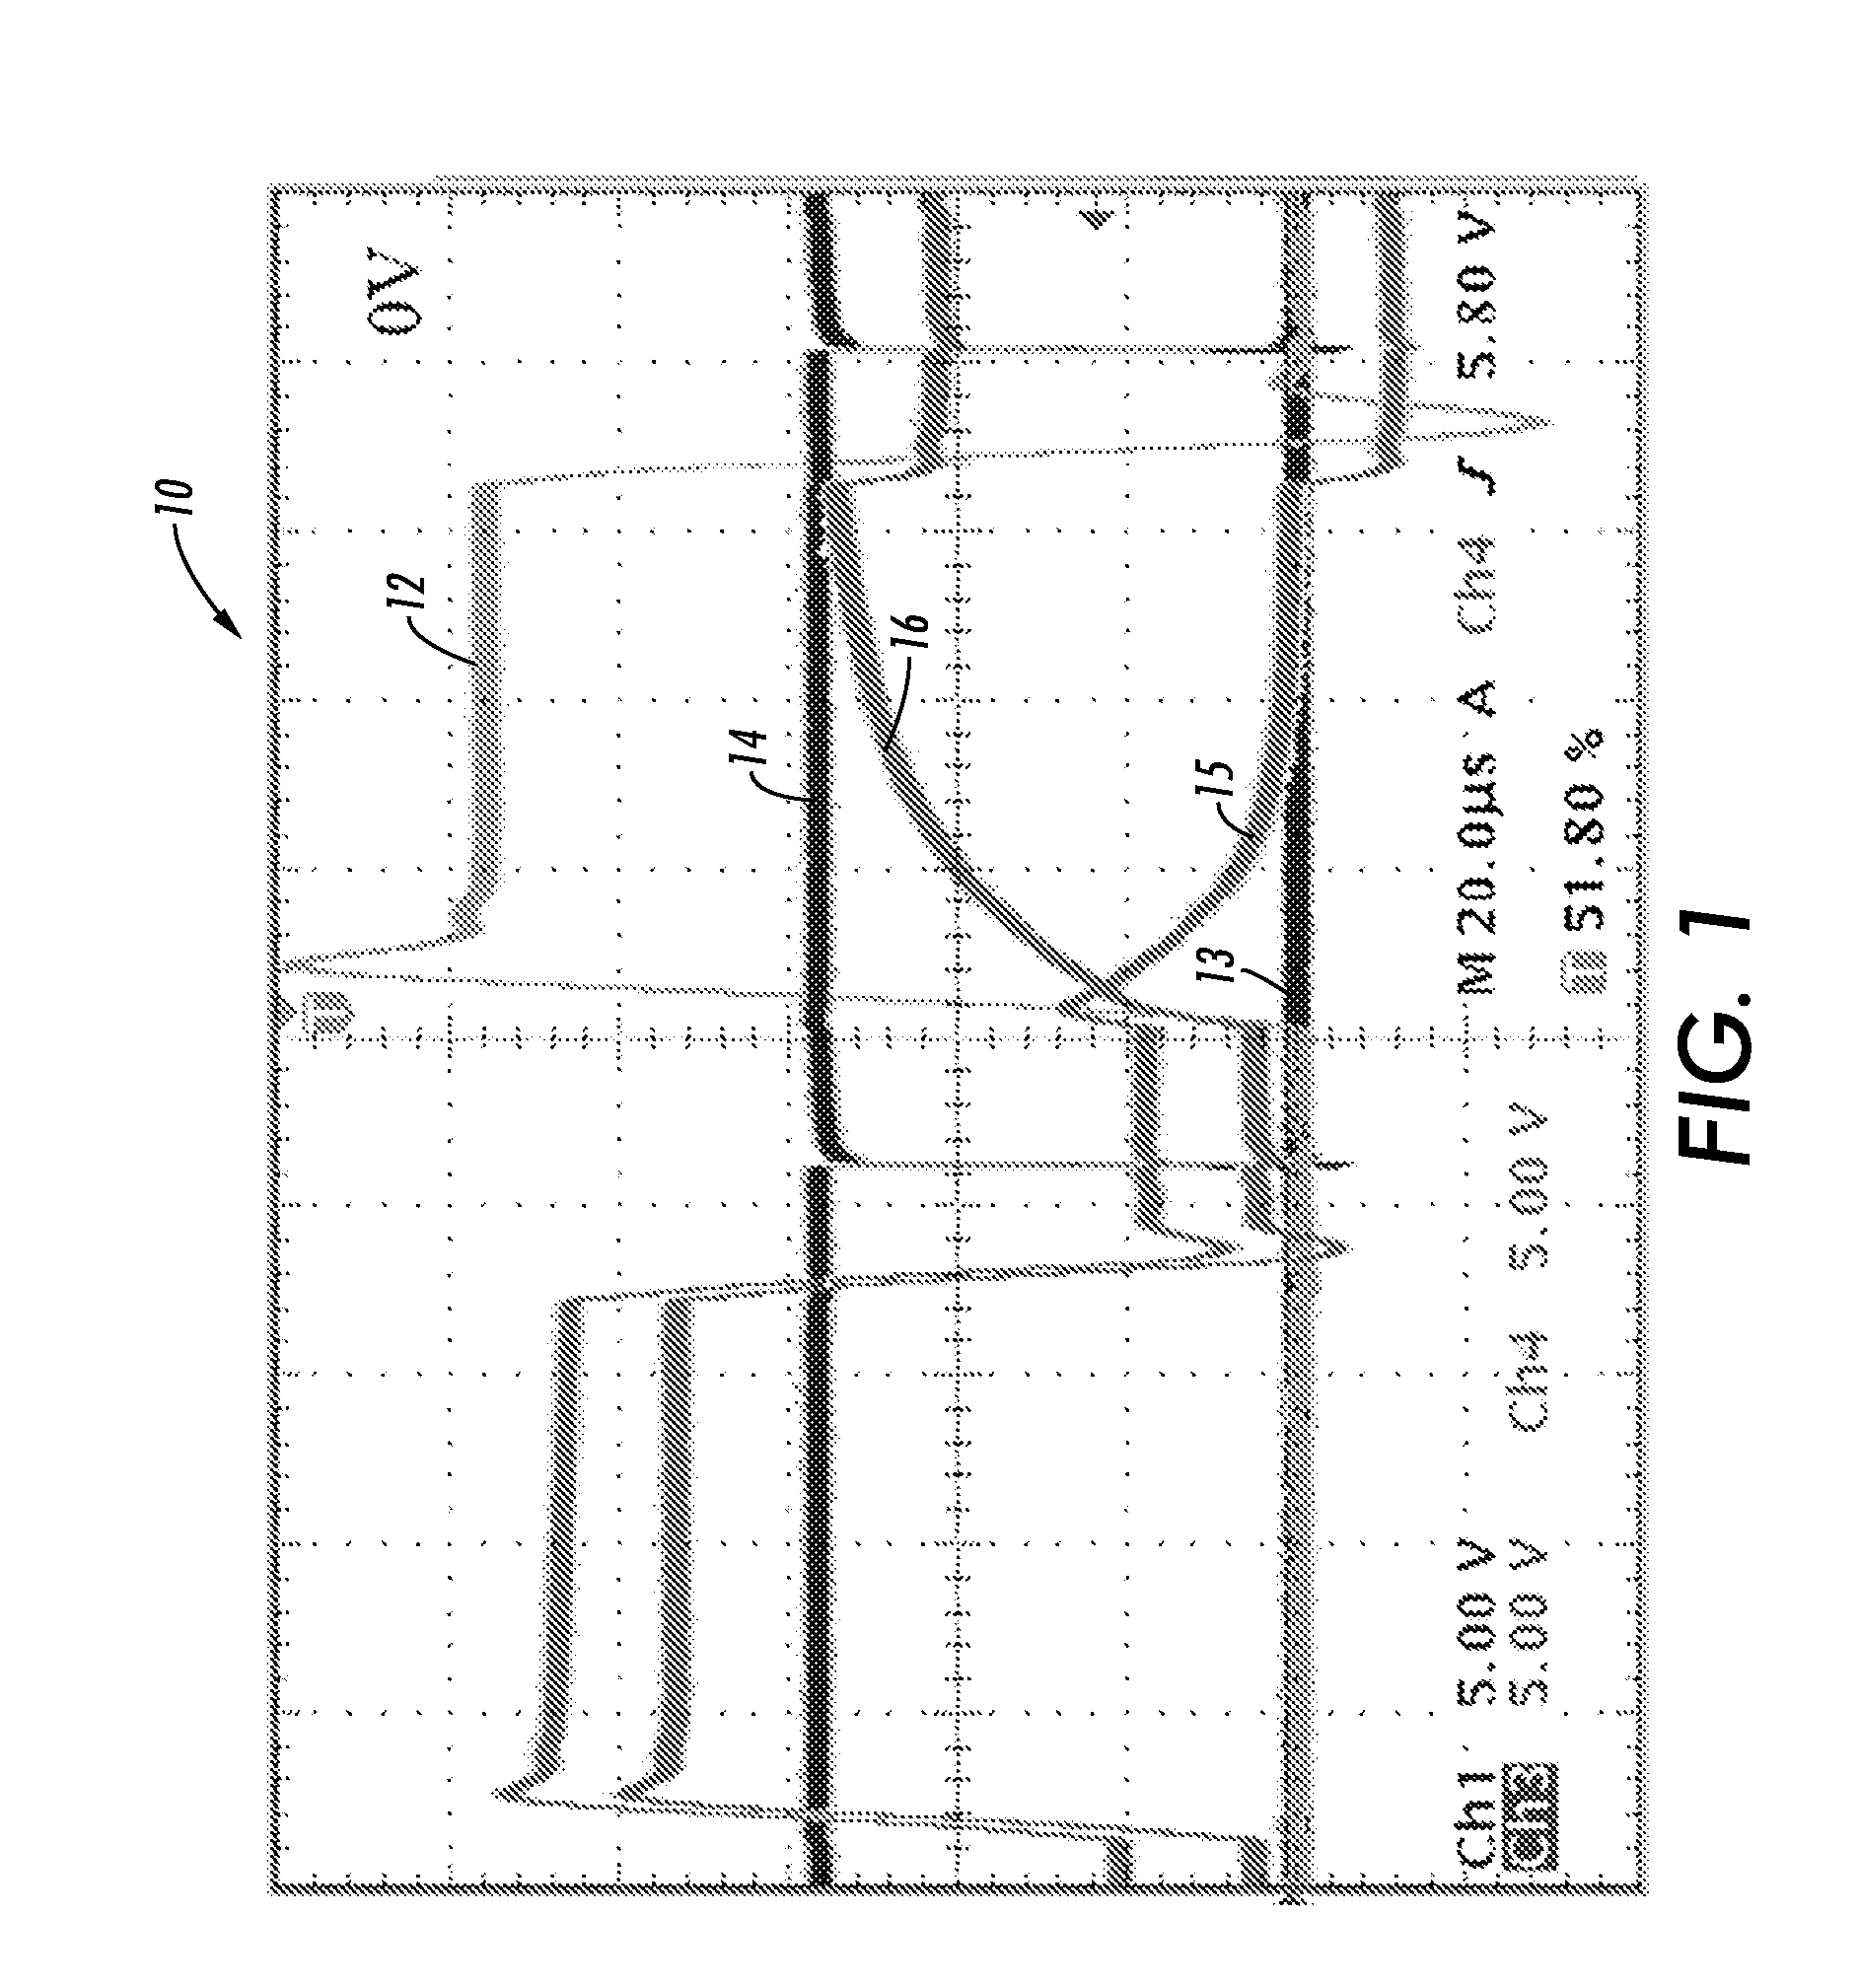 Method and system for improved testing of transistor arrays